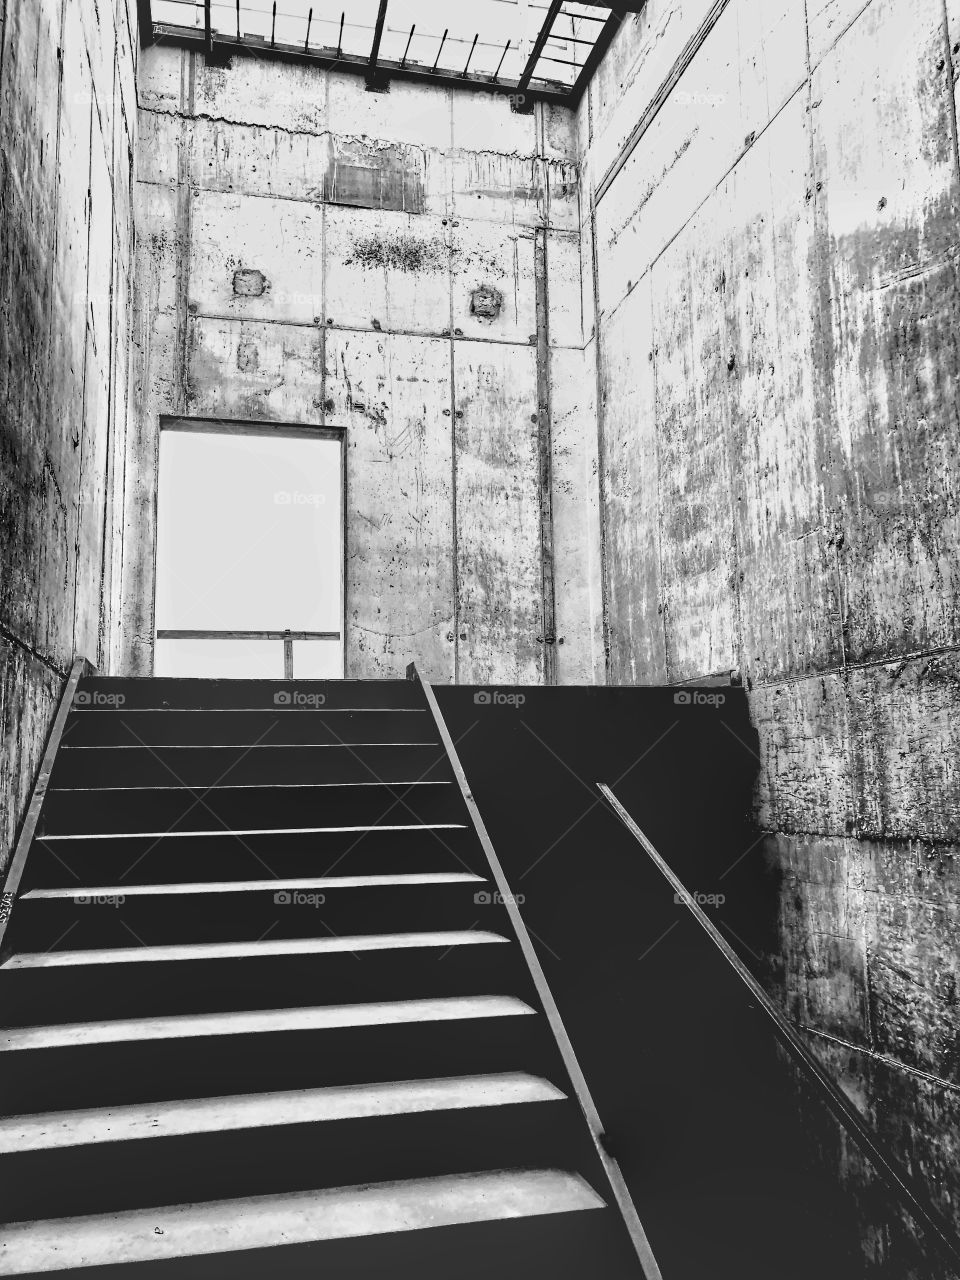 Stairwell at courthouse project in Edinburg Texas 